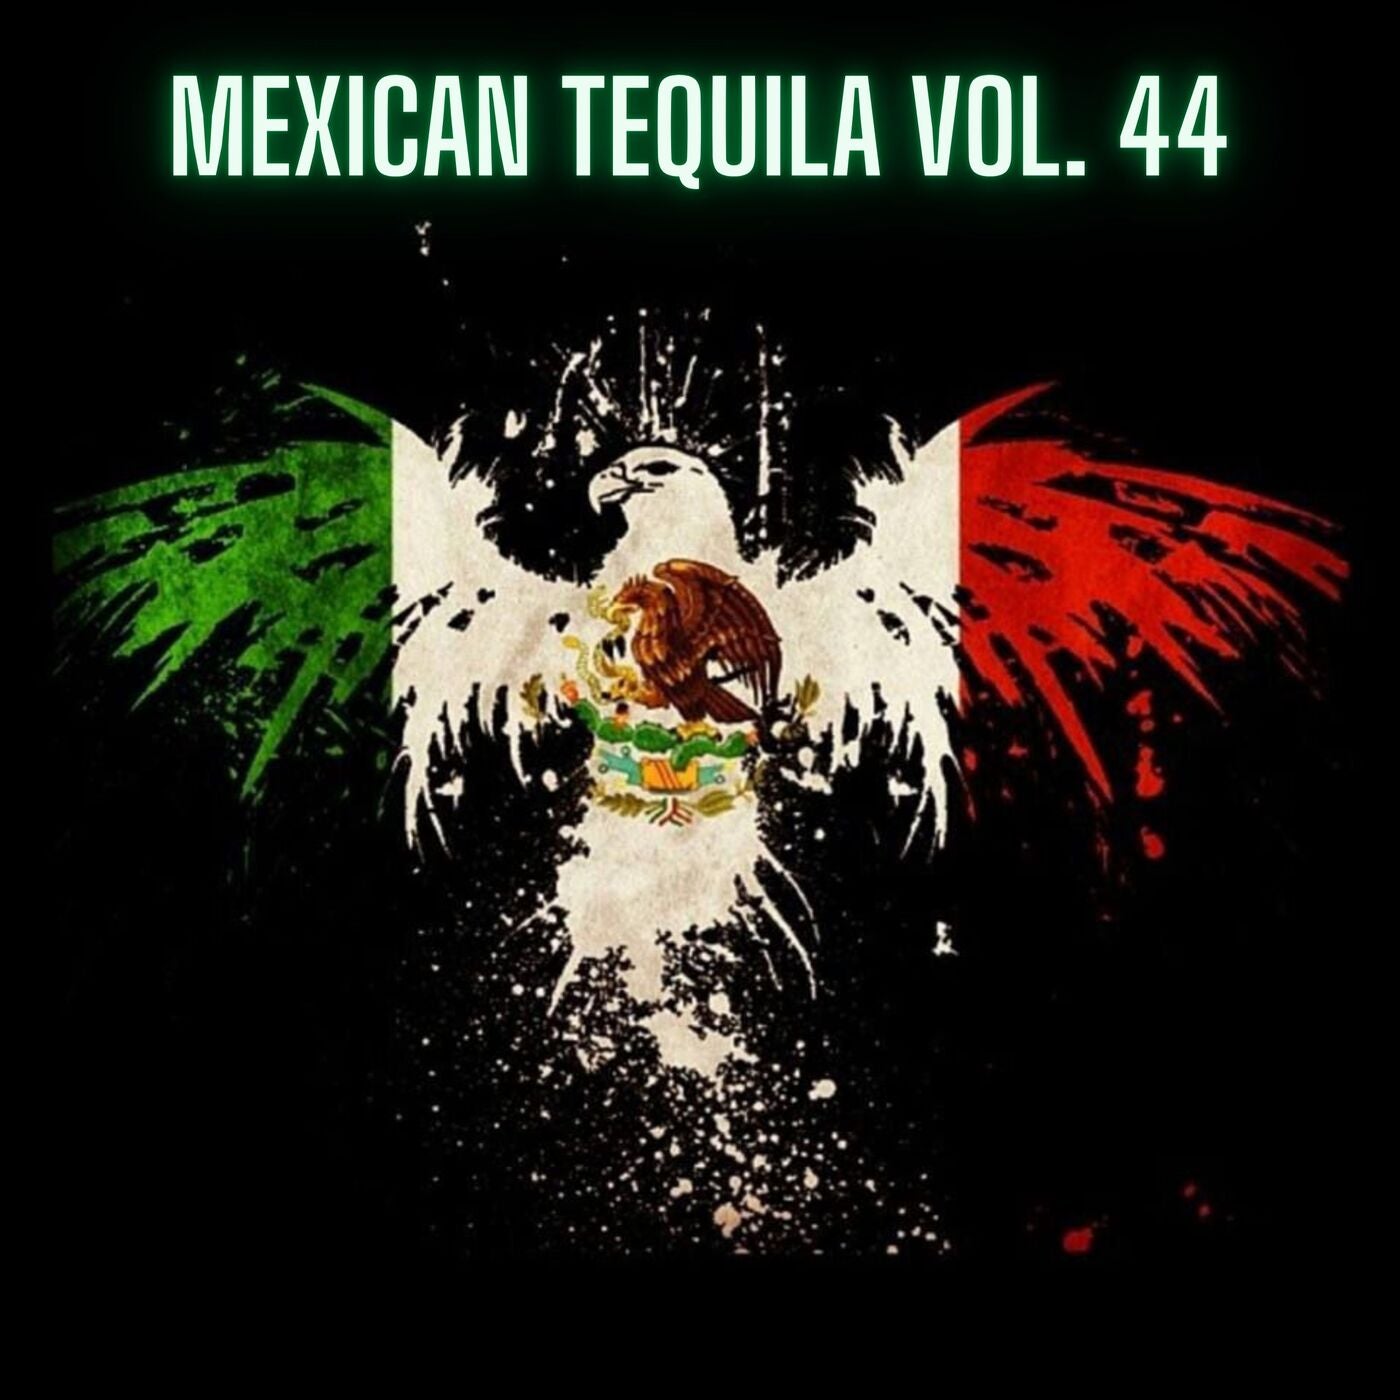 Mexican Tequila Vol. 44